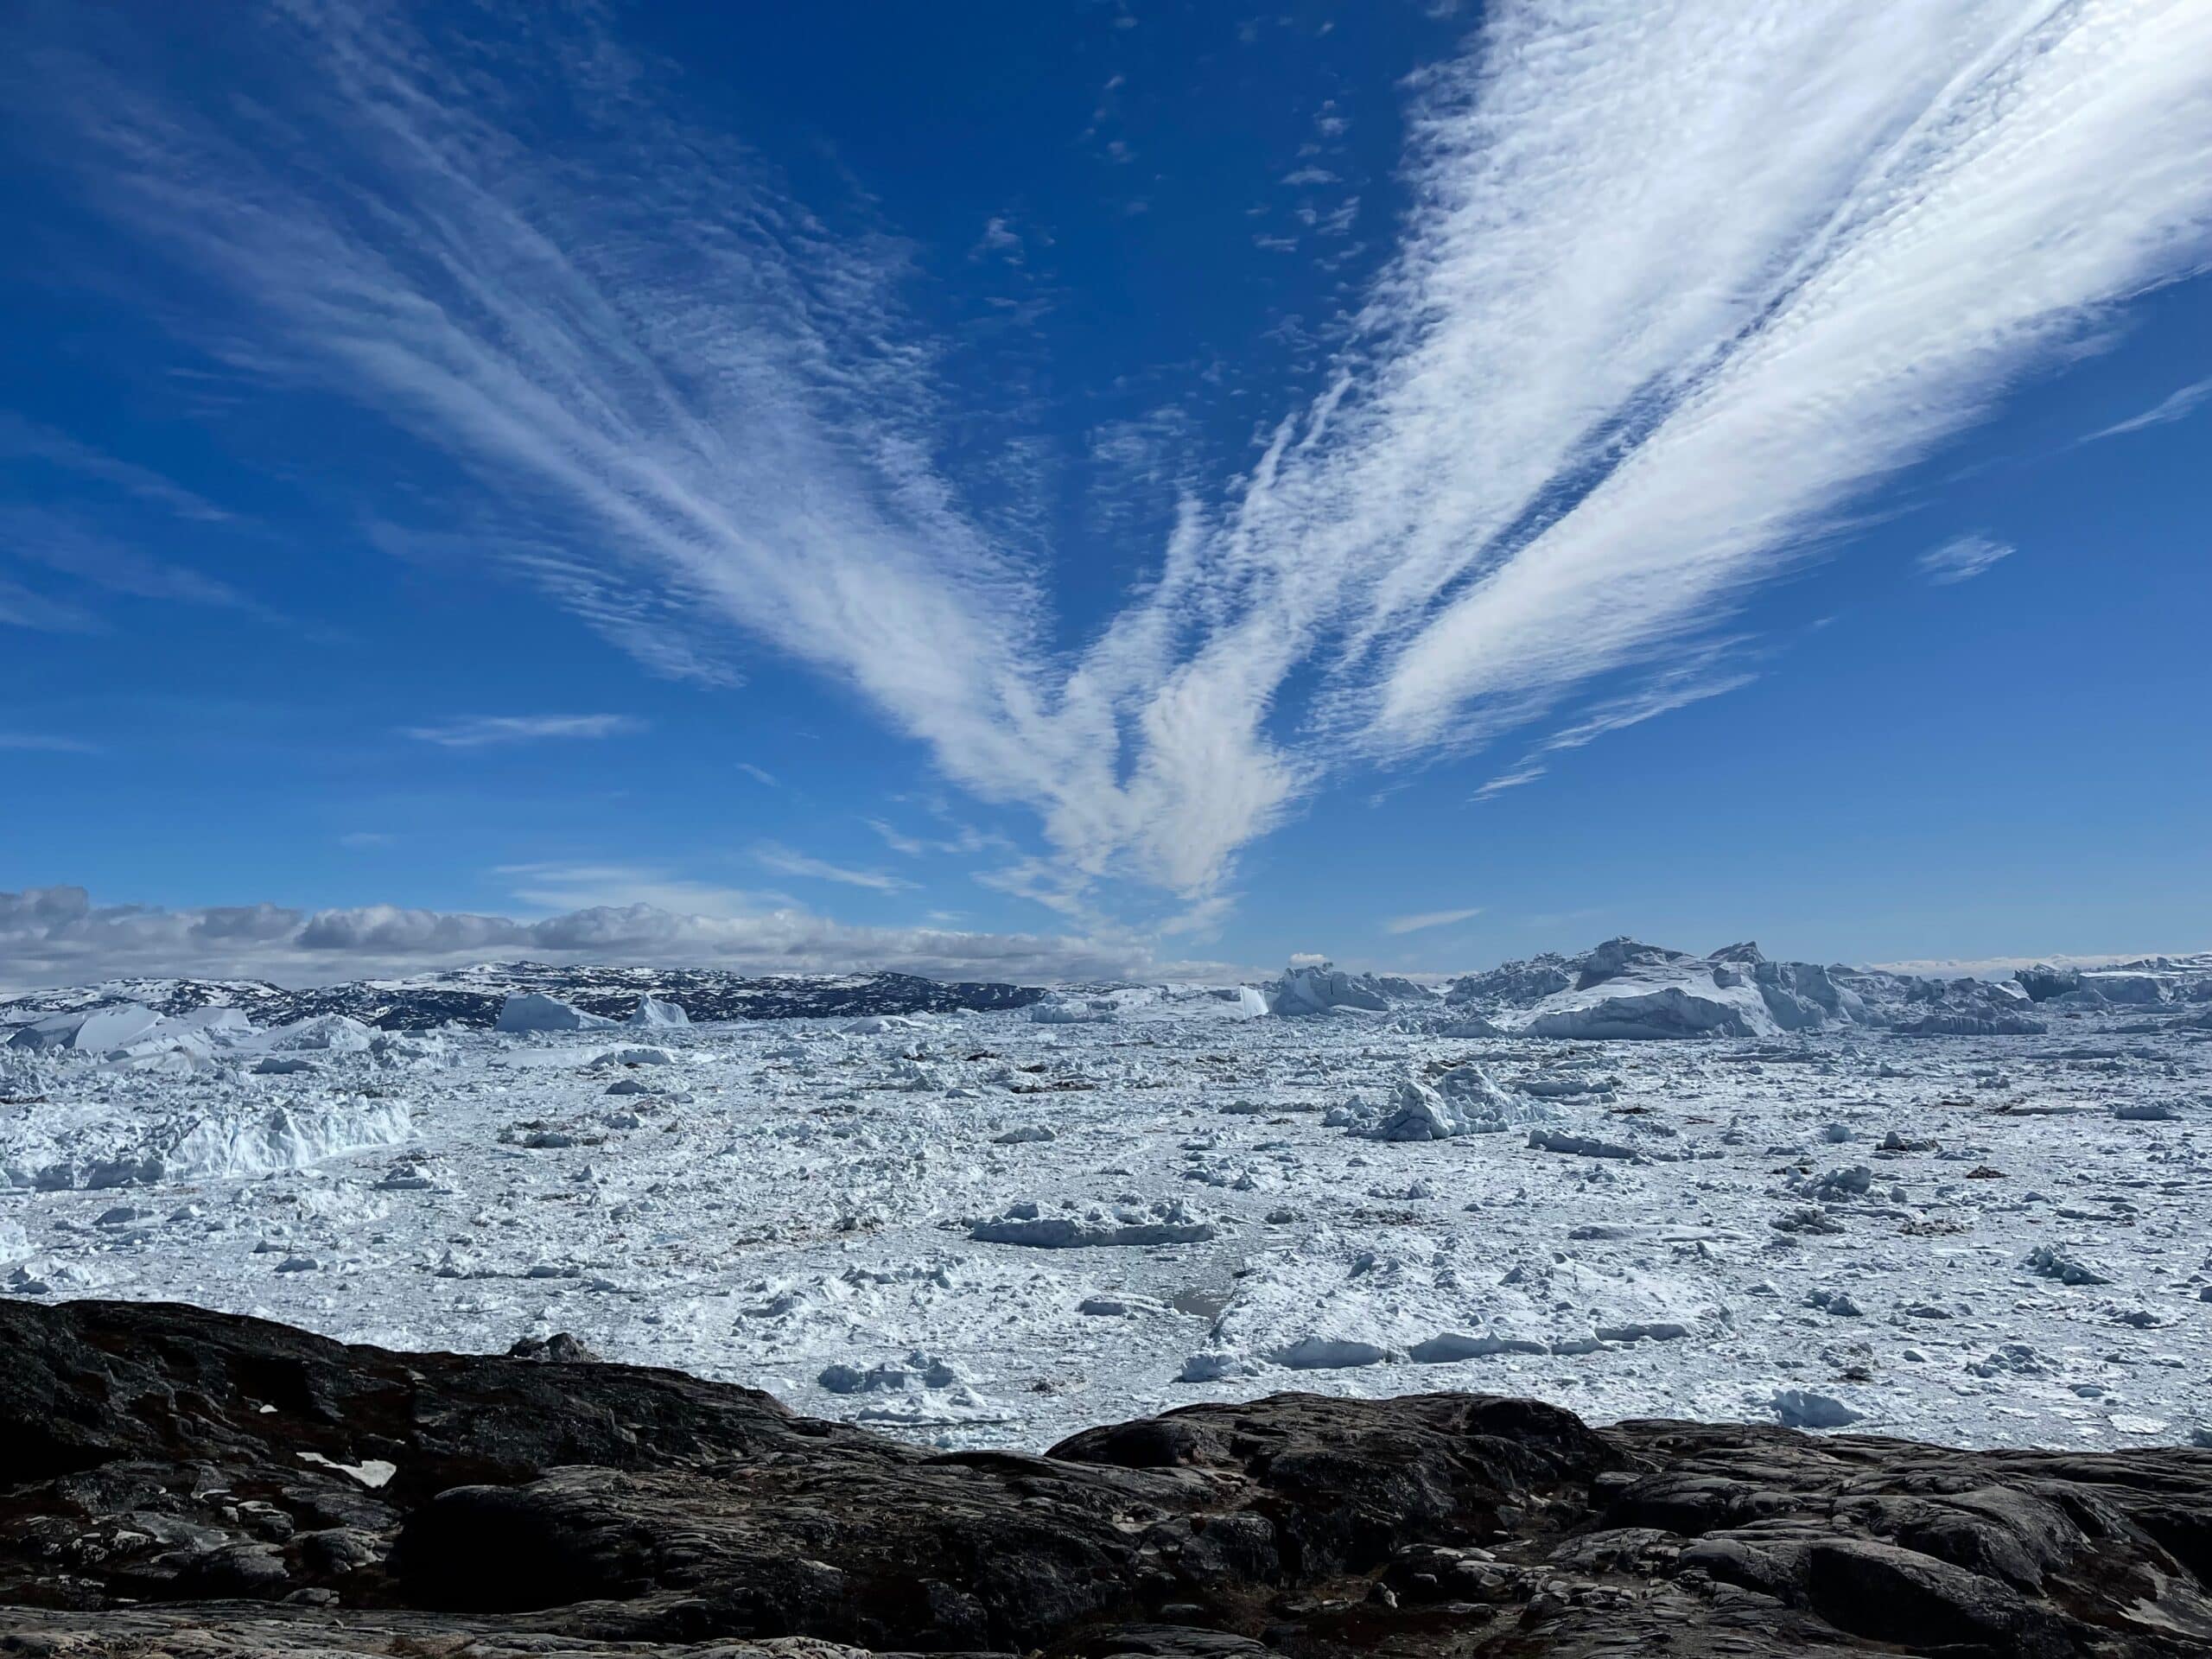 Clouds streaking across a blue sky above icy ground